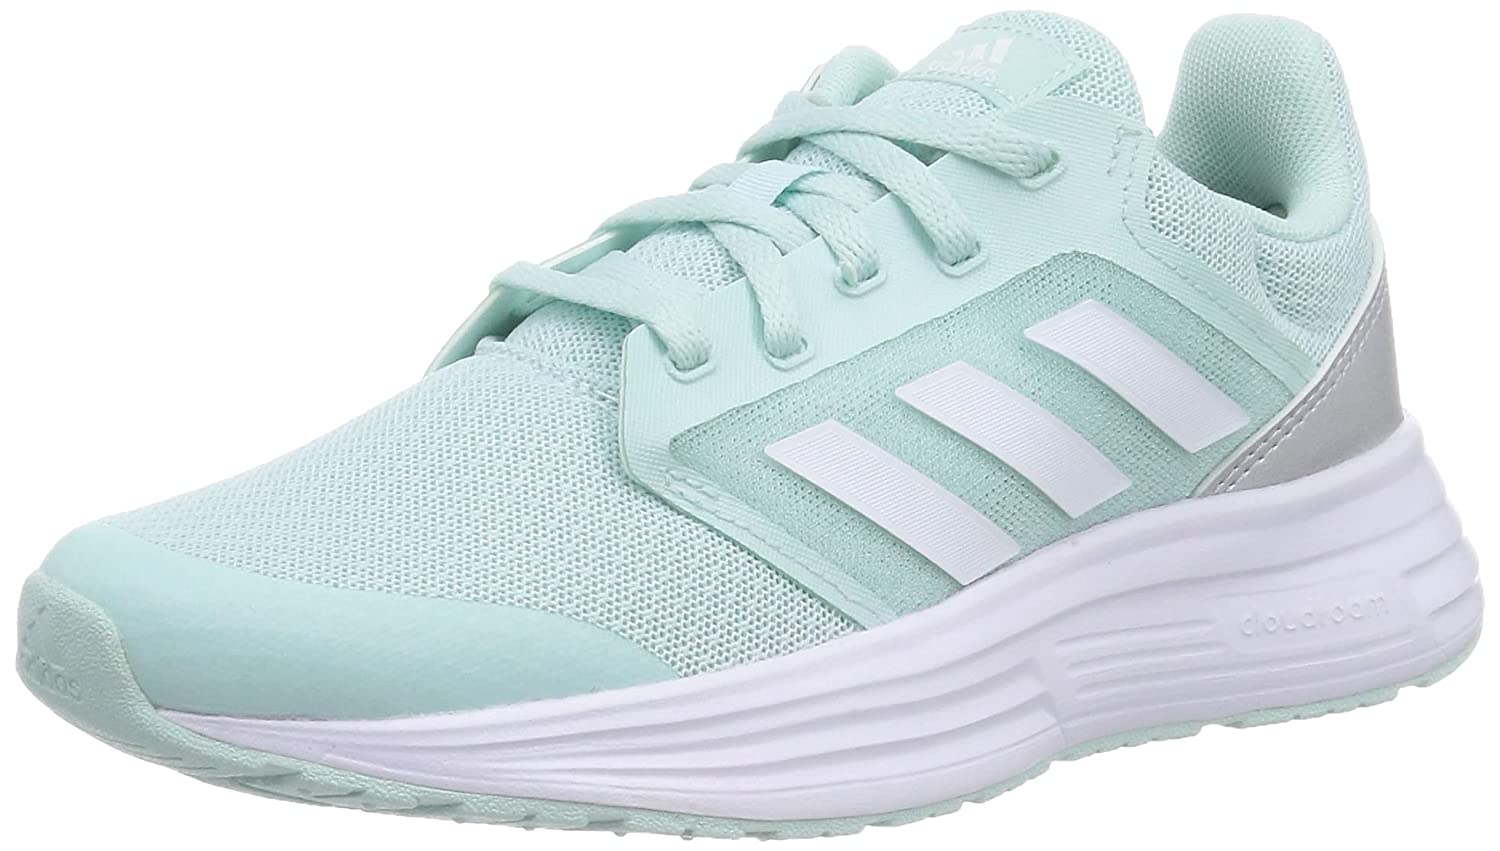 gazelle dame adidas store locations in california  RvceShops  F34758   adidas terrex shoes amazon india 2017 schedule Clear Mint White